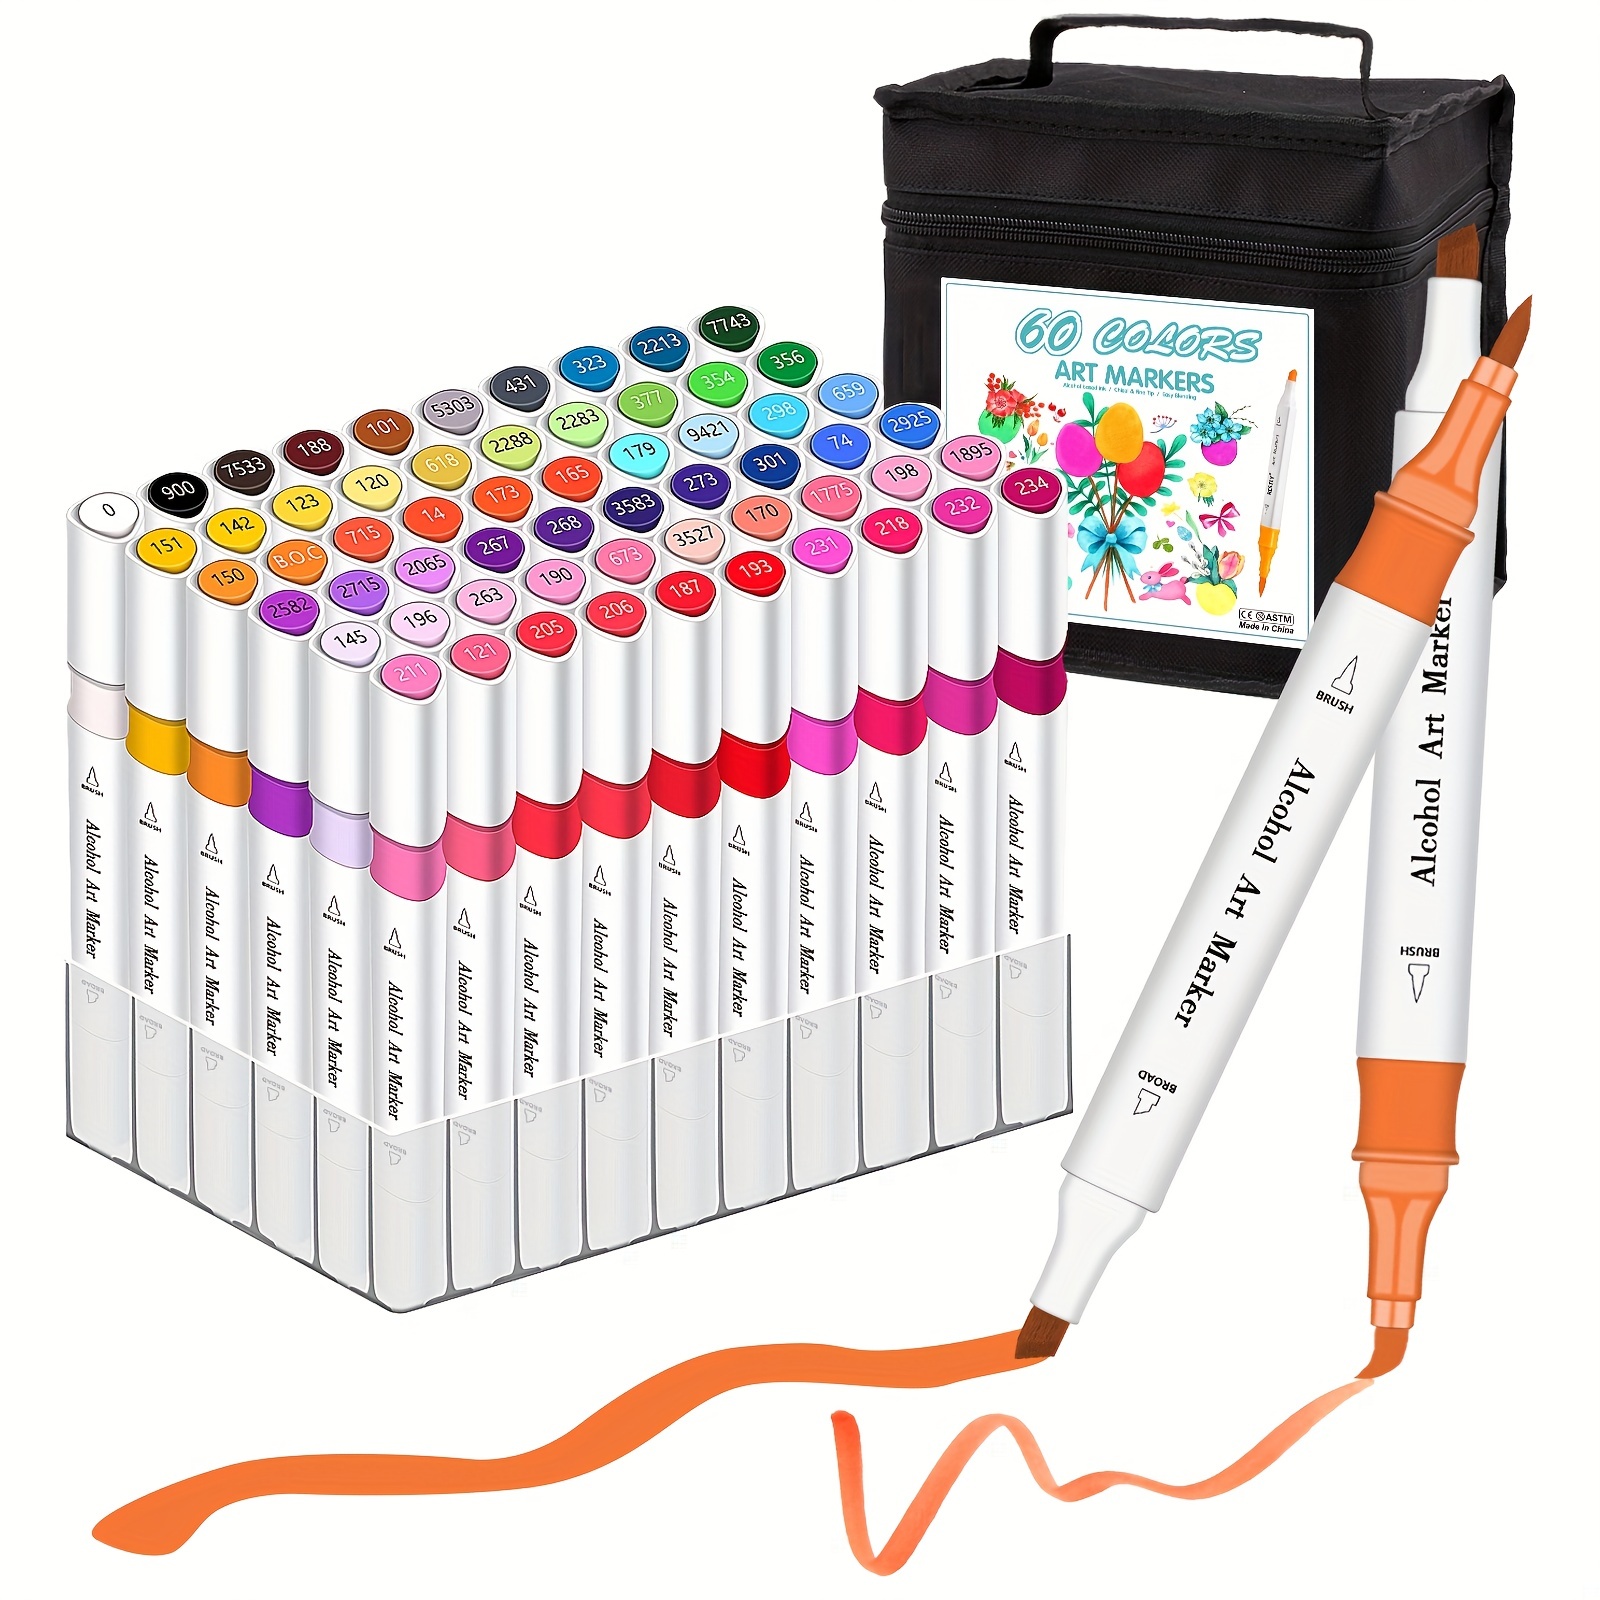 Brush Tip Alcohol Markers Set - 49 Colors Dual Tip Permanent Art Markers  for Adult Coloring Artist Sketching Illustration Drawing